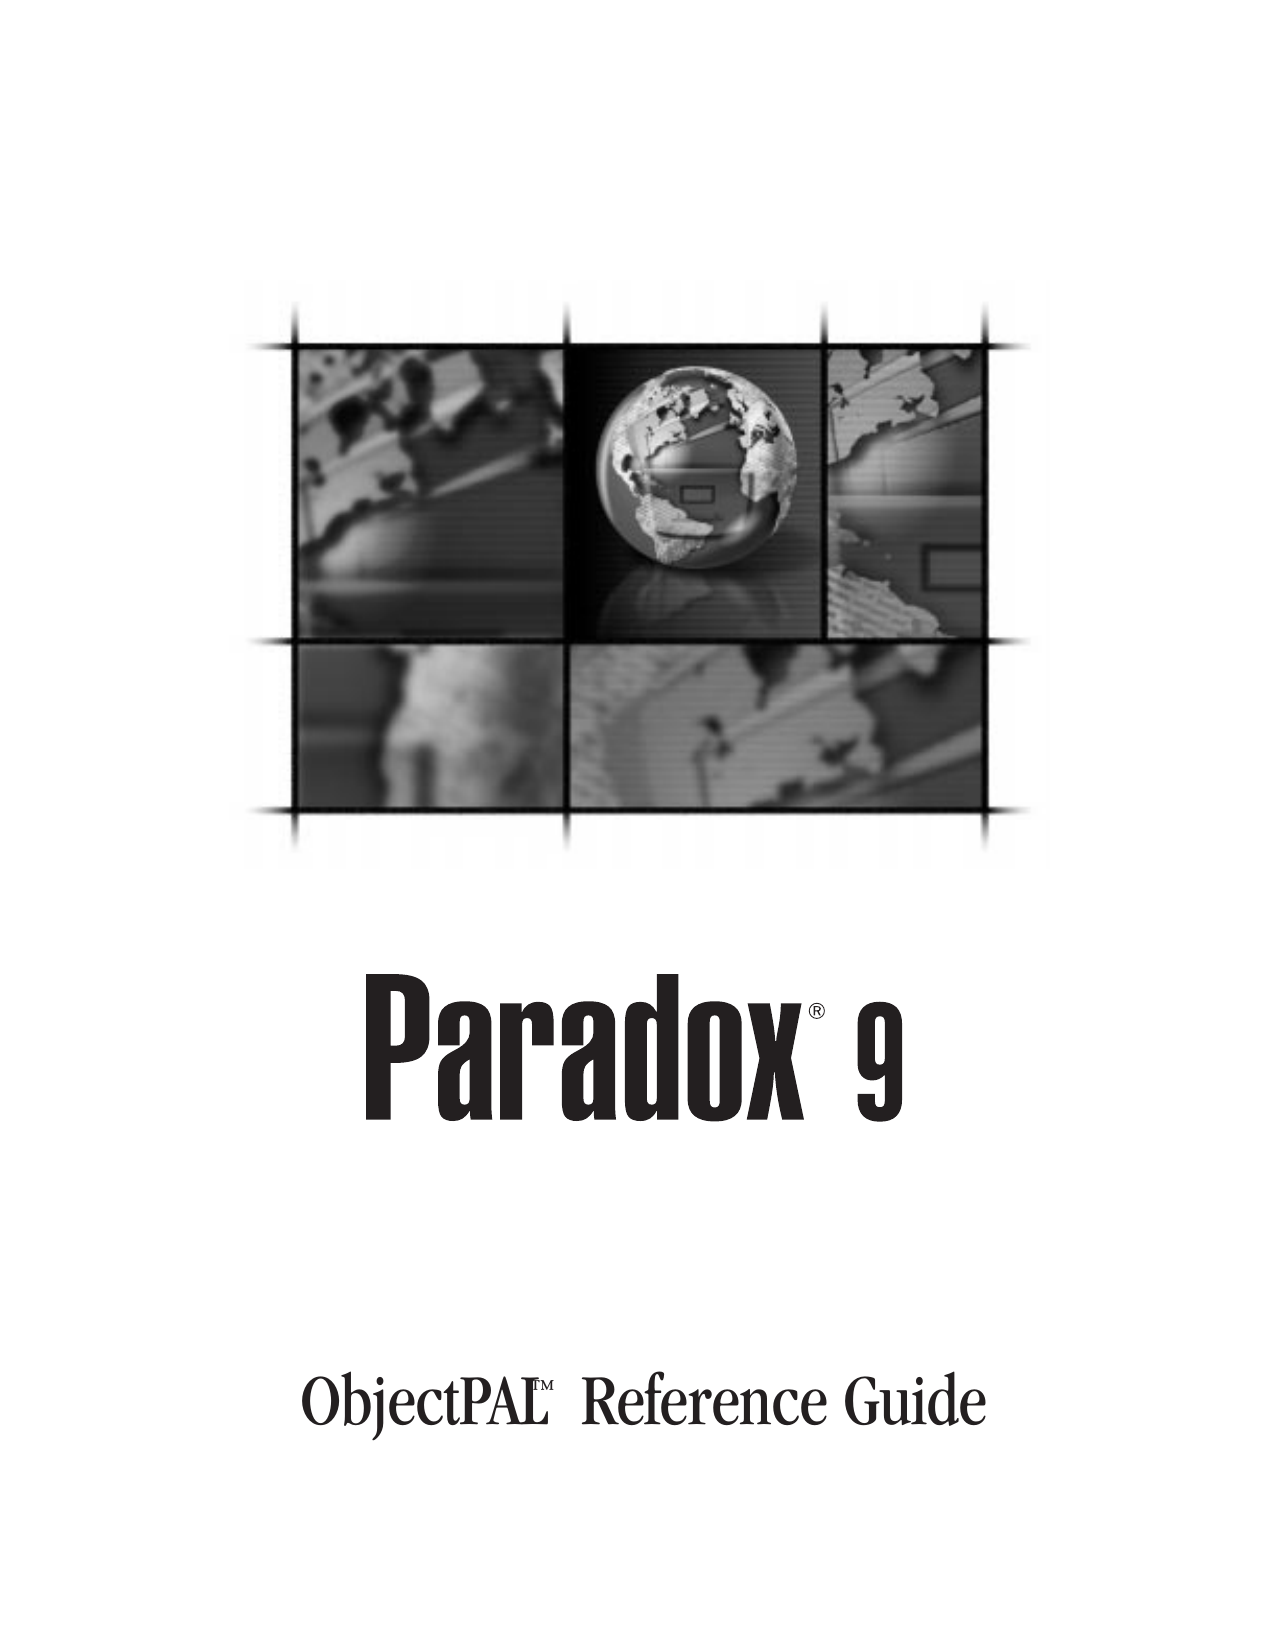 corel paradox reports not opening